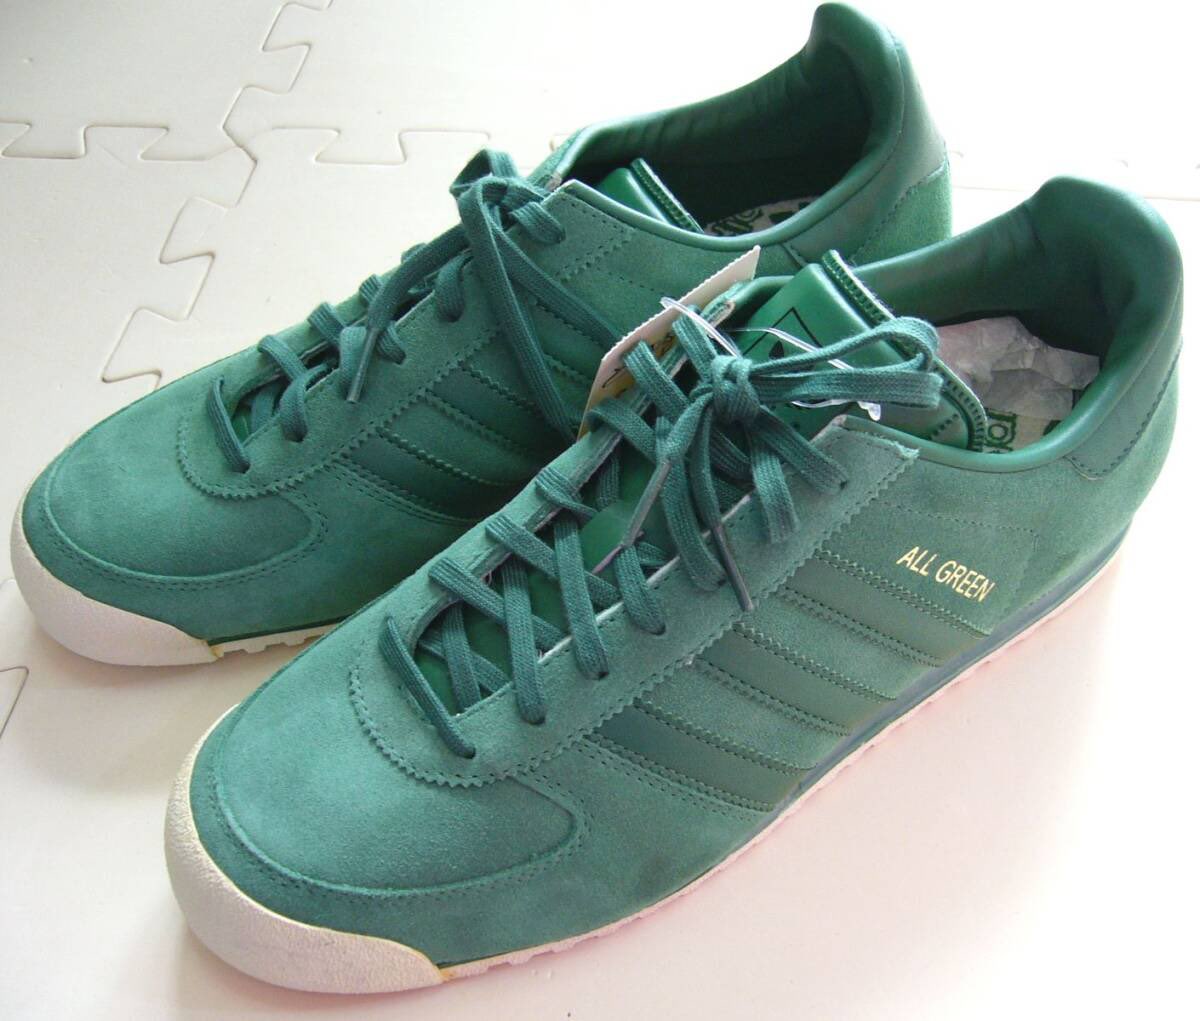 Pair I mentioned on the video that I’ve never had or seen for sale ever Won’t say the size but there BNIBWT 2005 Adidas All Green Coming soon….. First in best dressed and have the cheque book ready